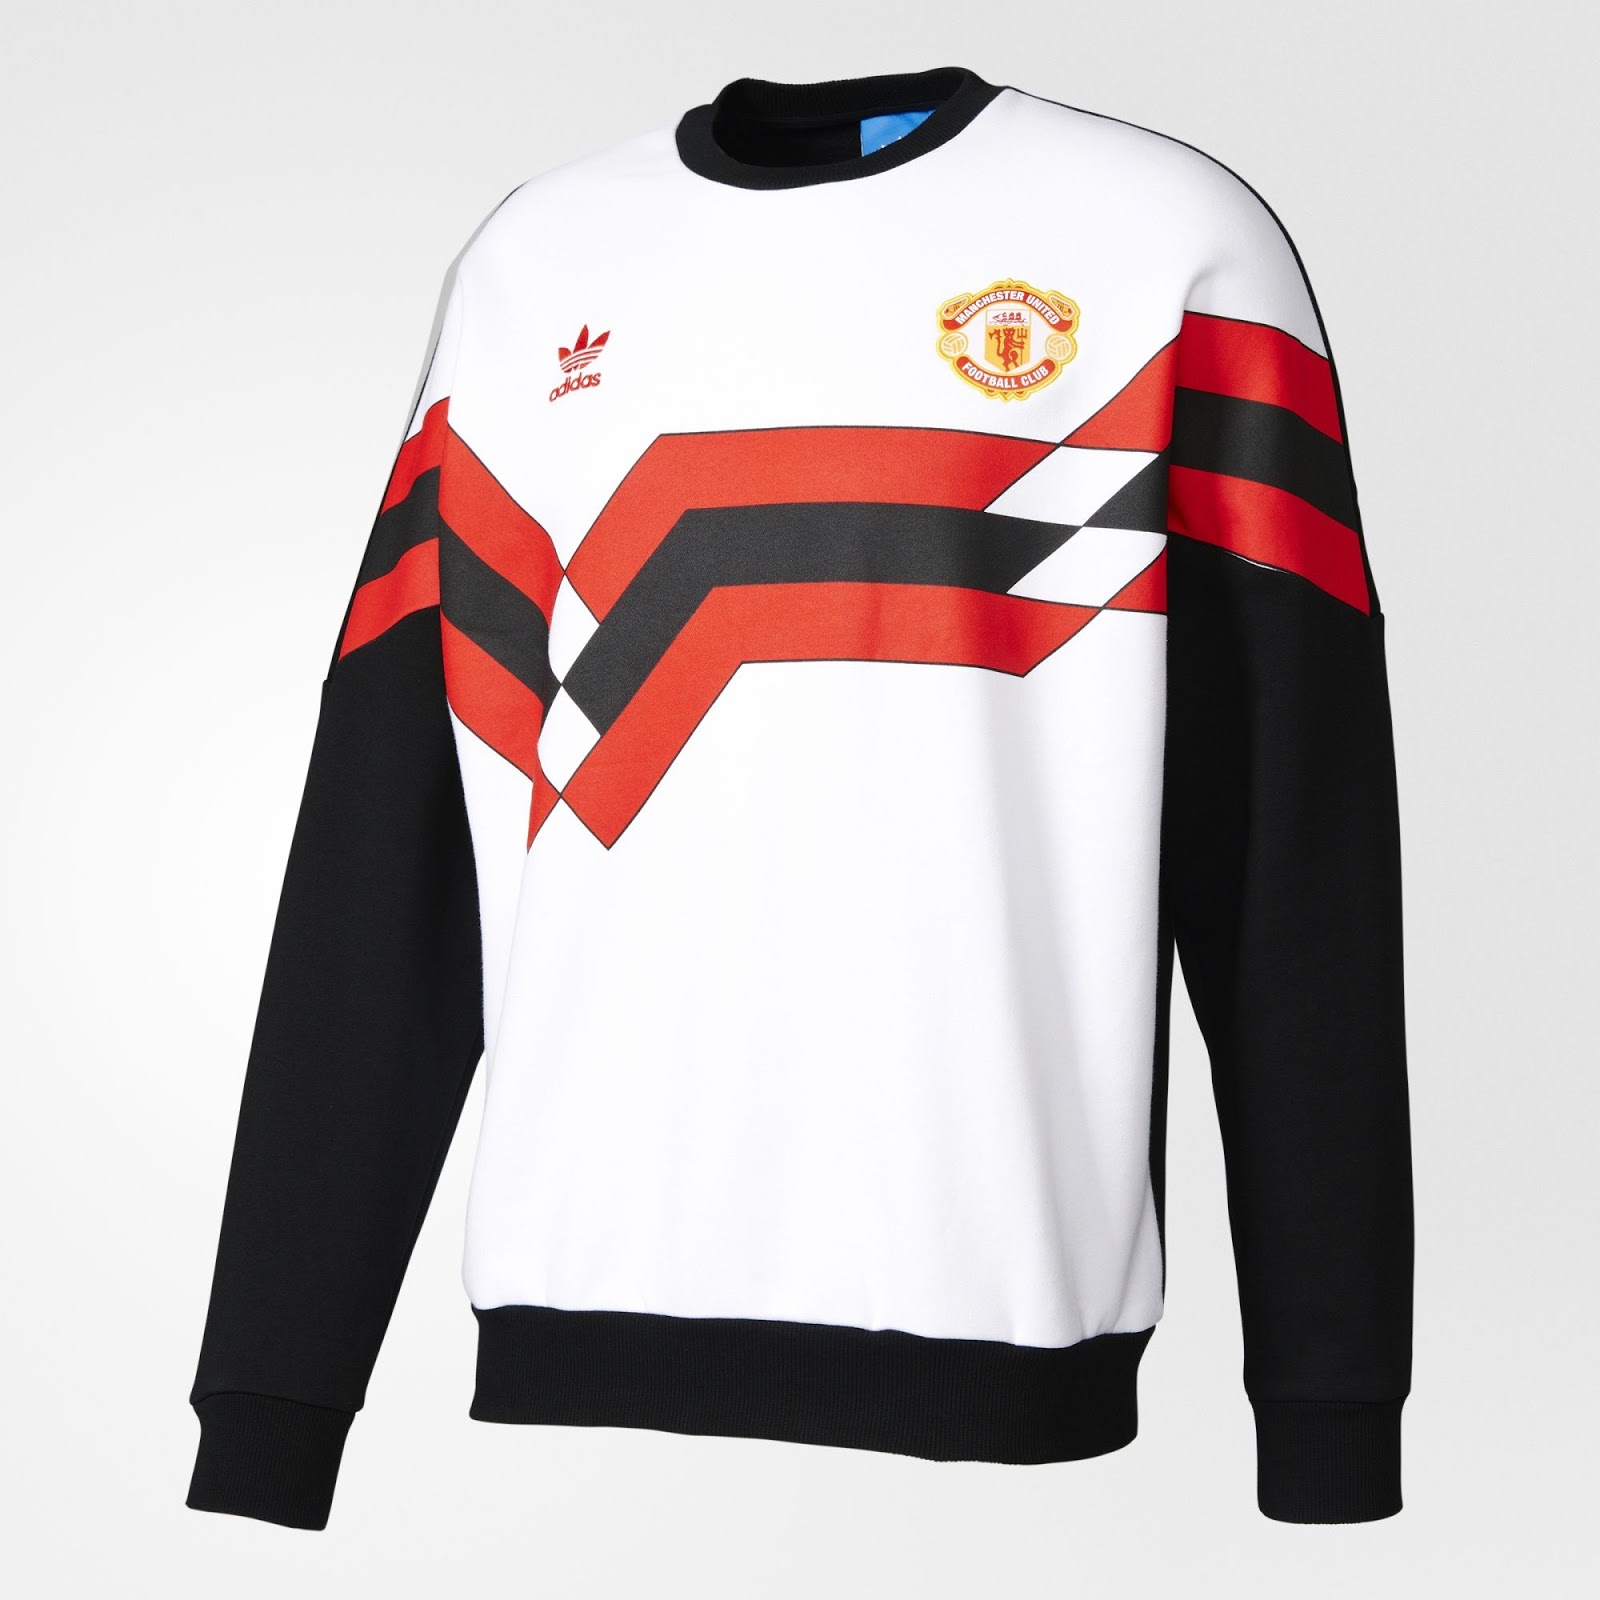 Adidas Originals Manchester United 2017 Collection Leaked - Footy Headlines